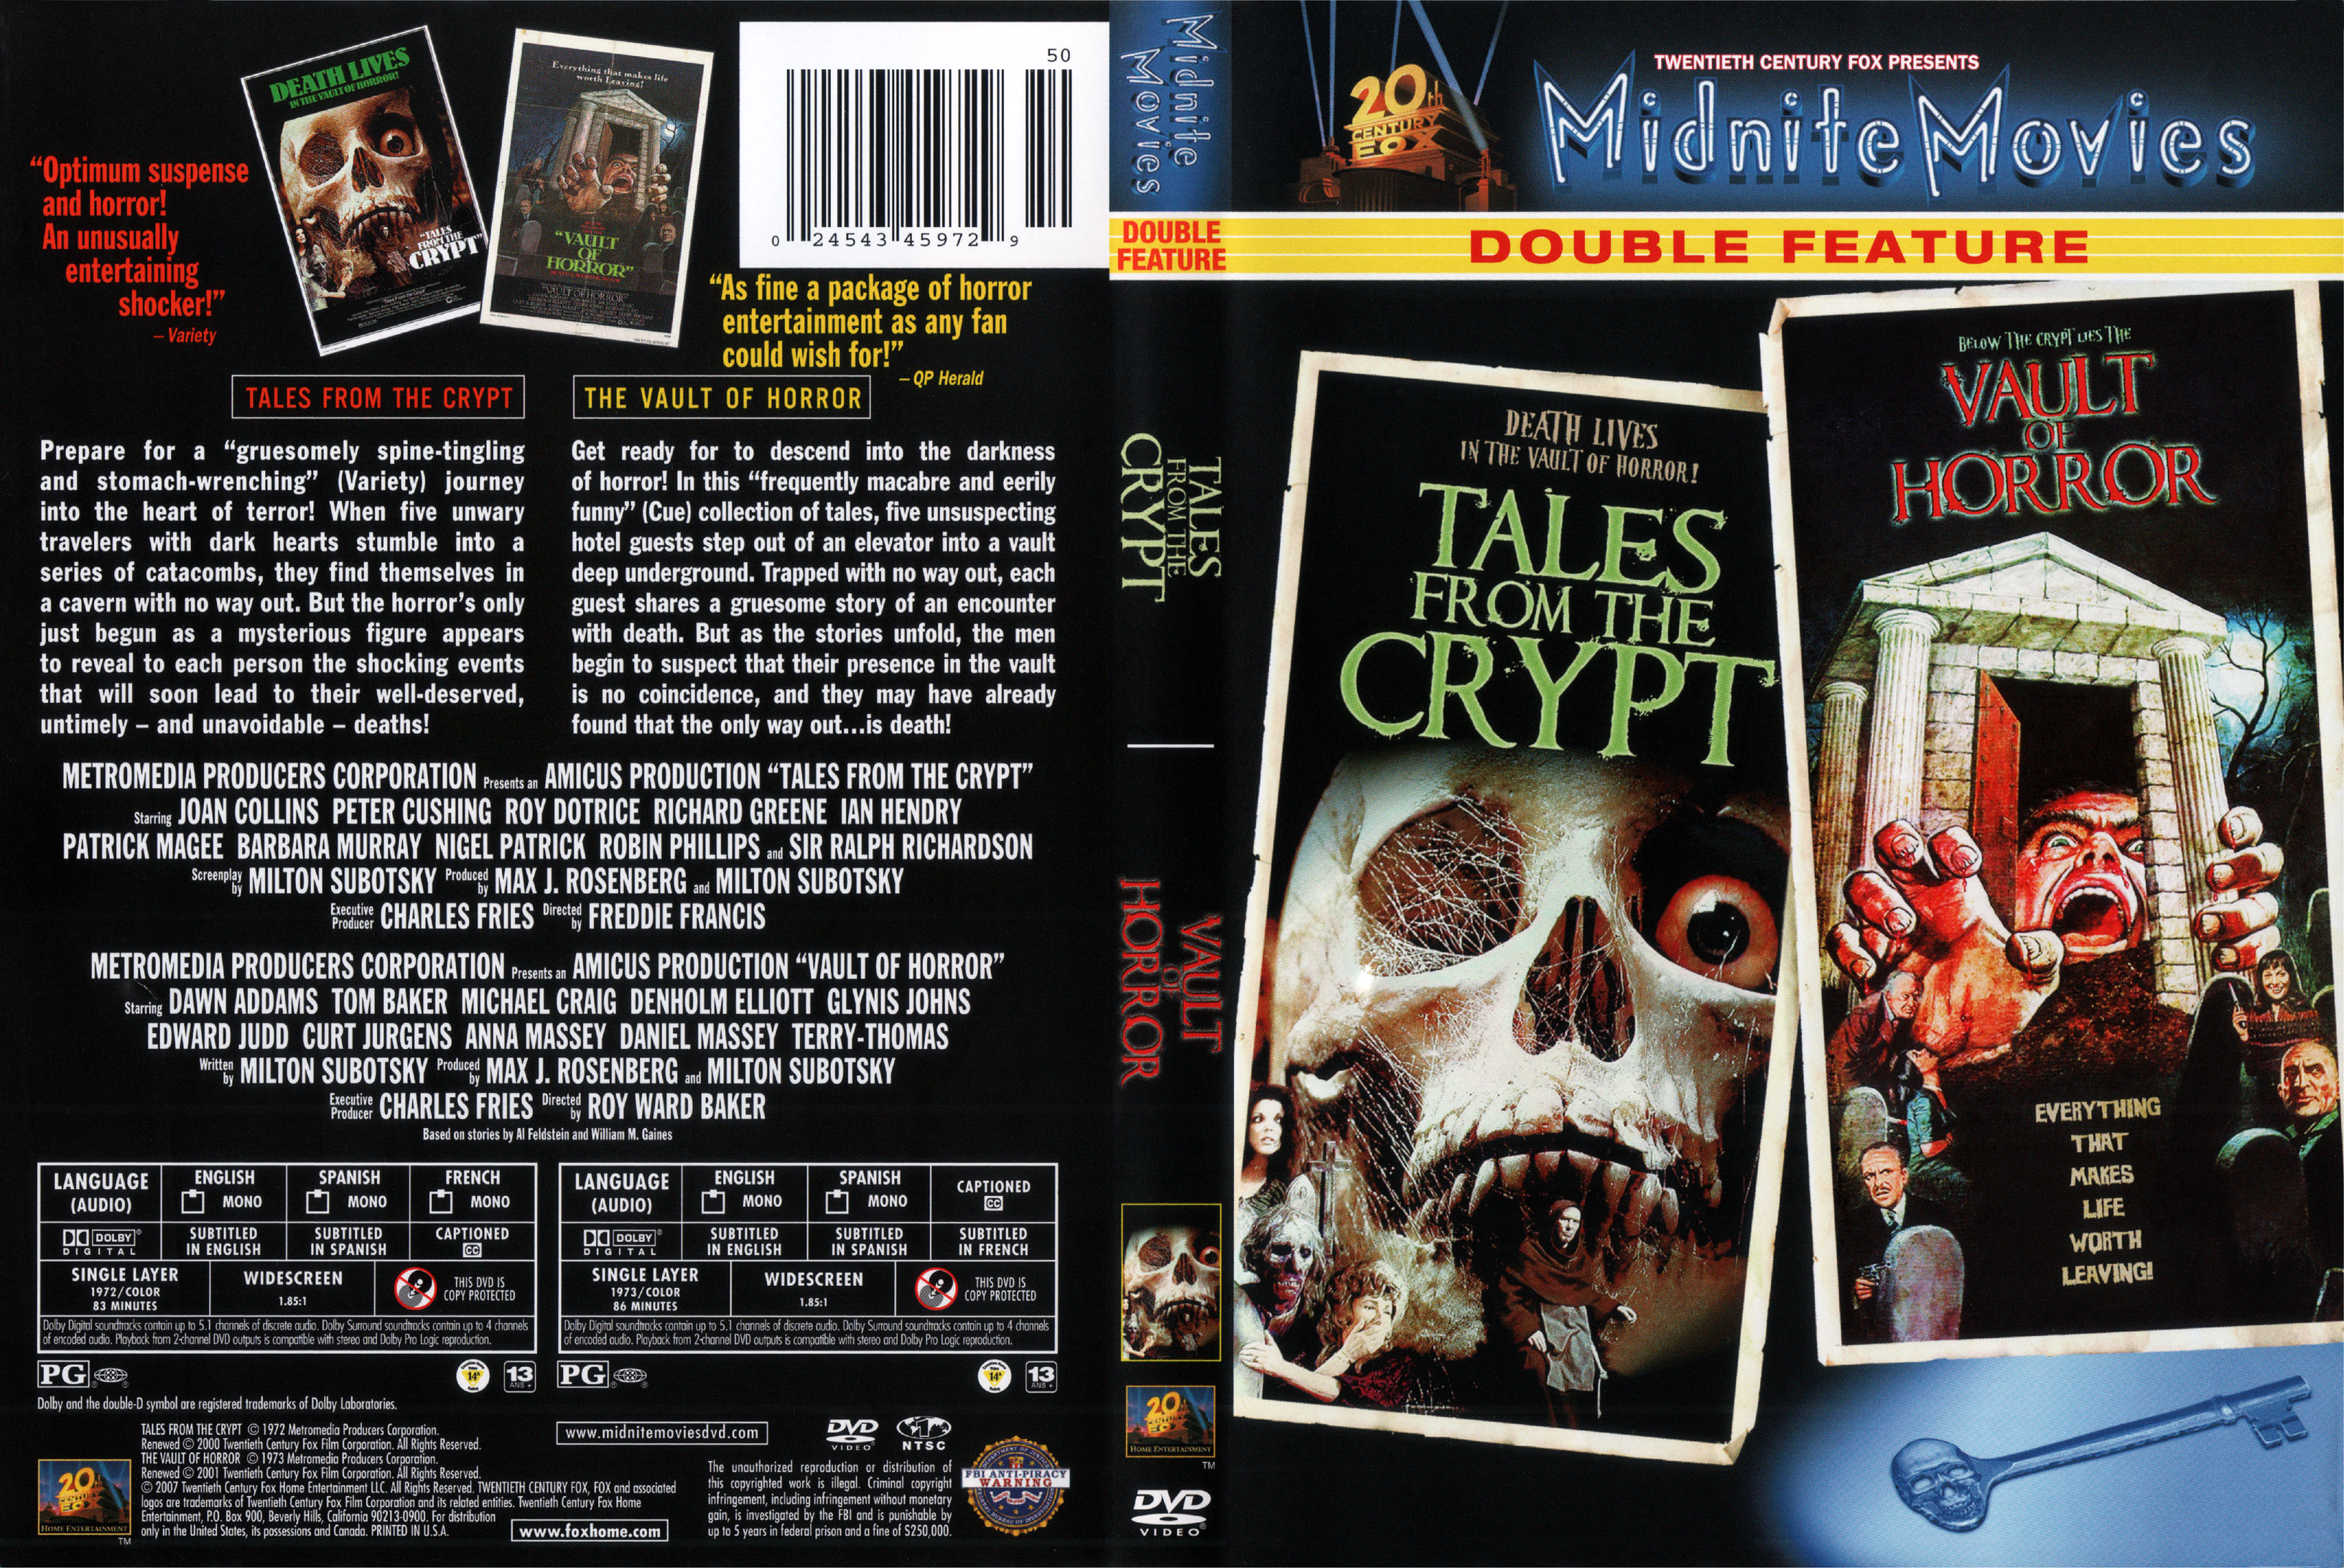 Tales from the crypt split personality